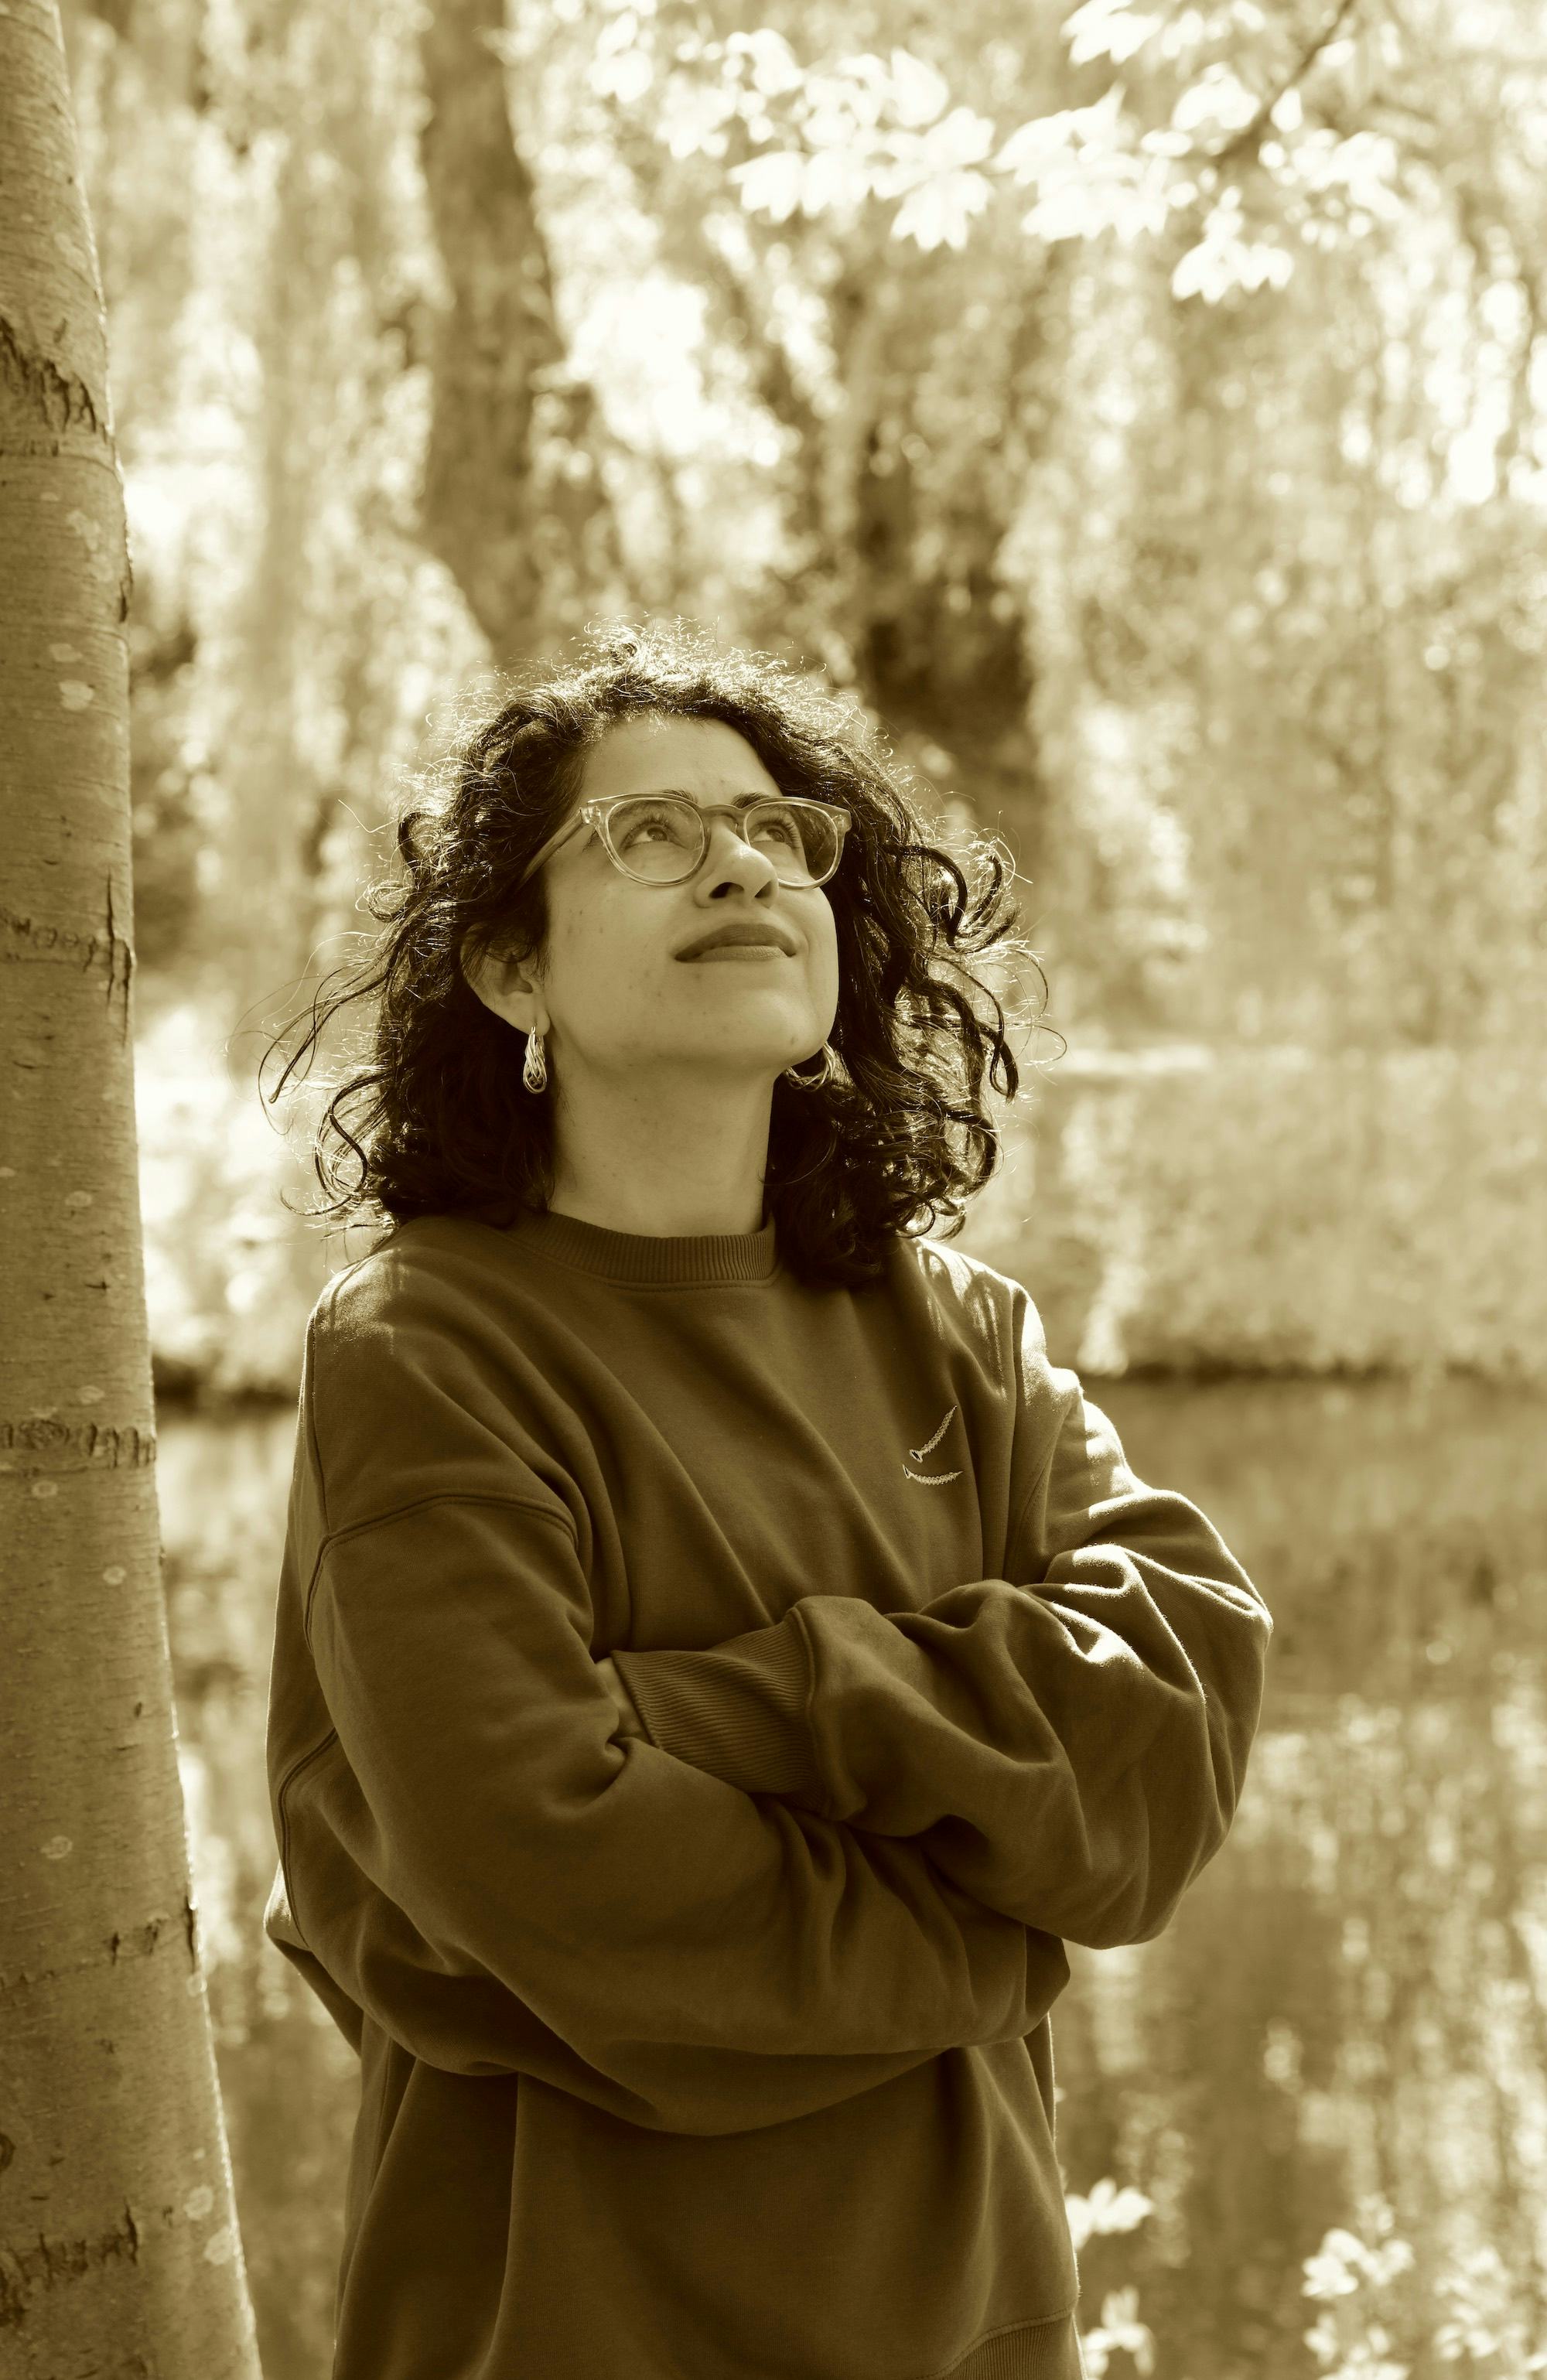 Portrait of artist Hira Nabi in a natural environment with trees, looking up to the sky